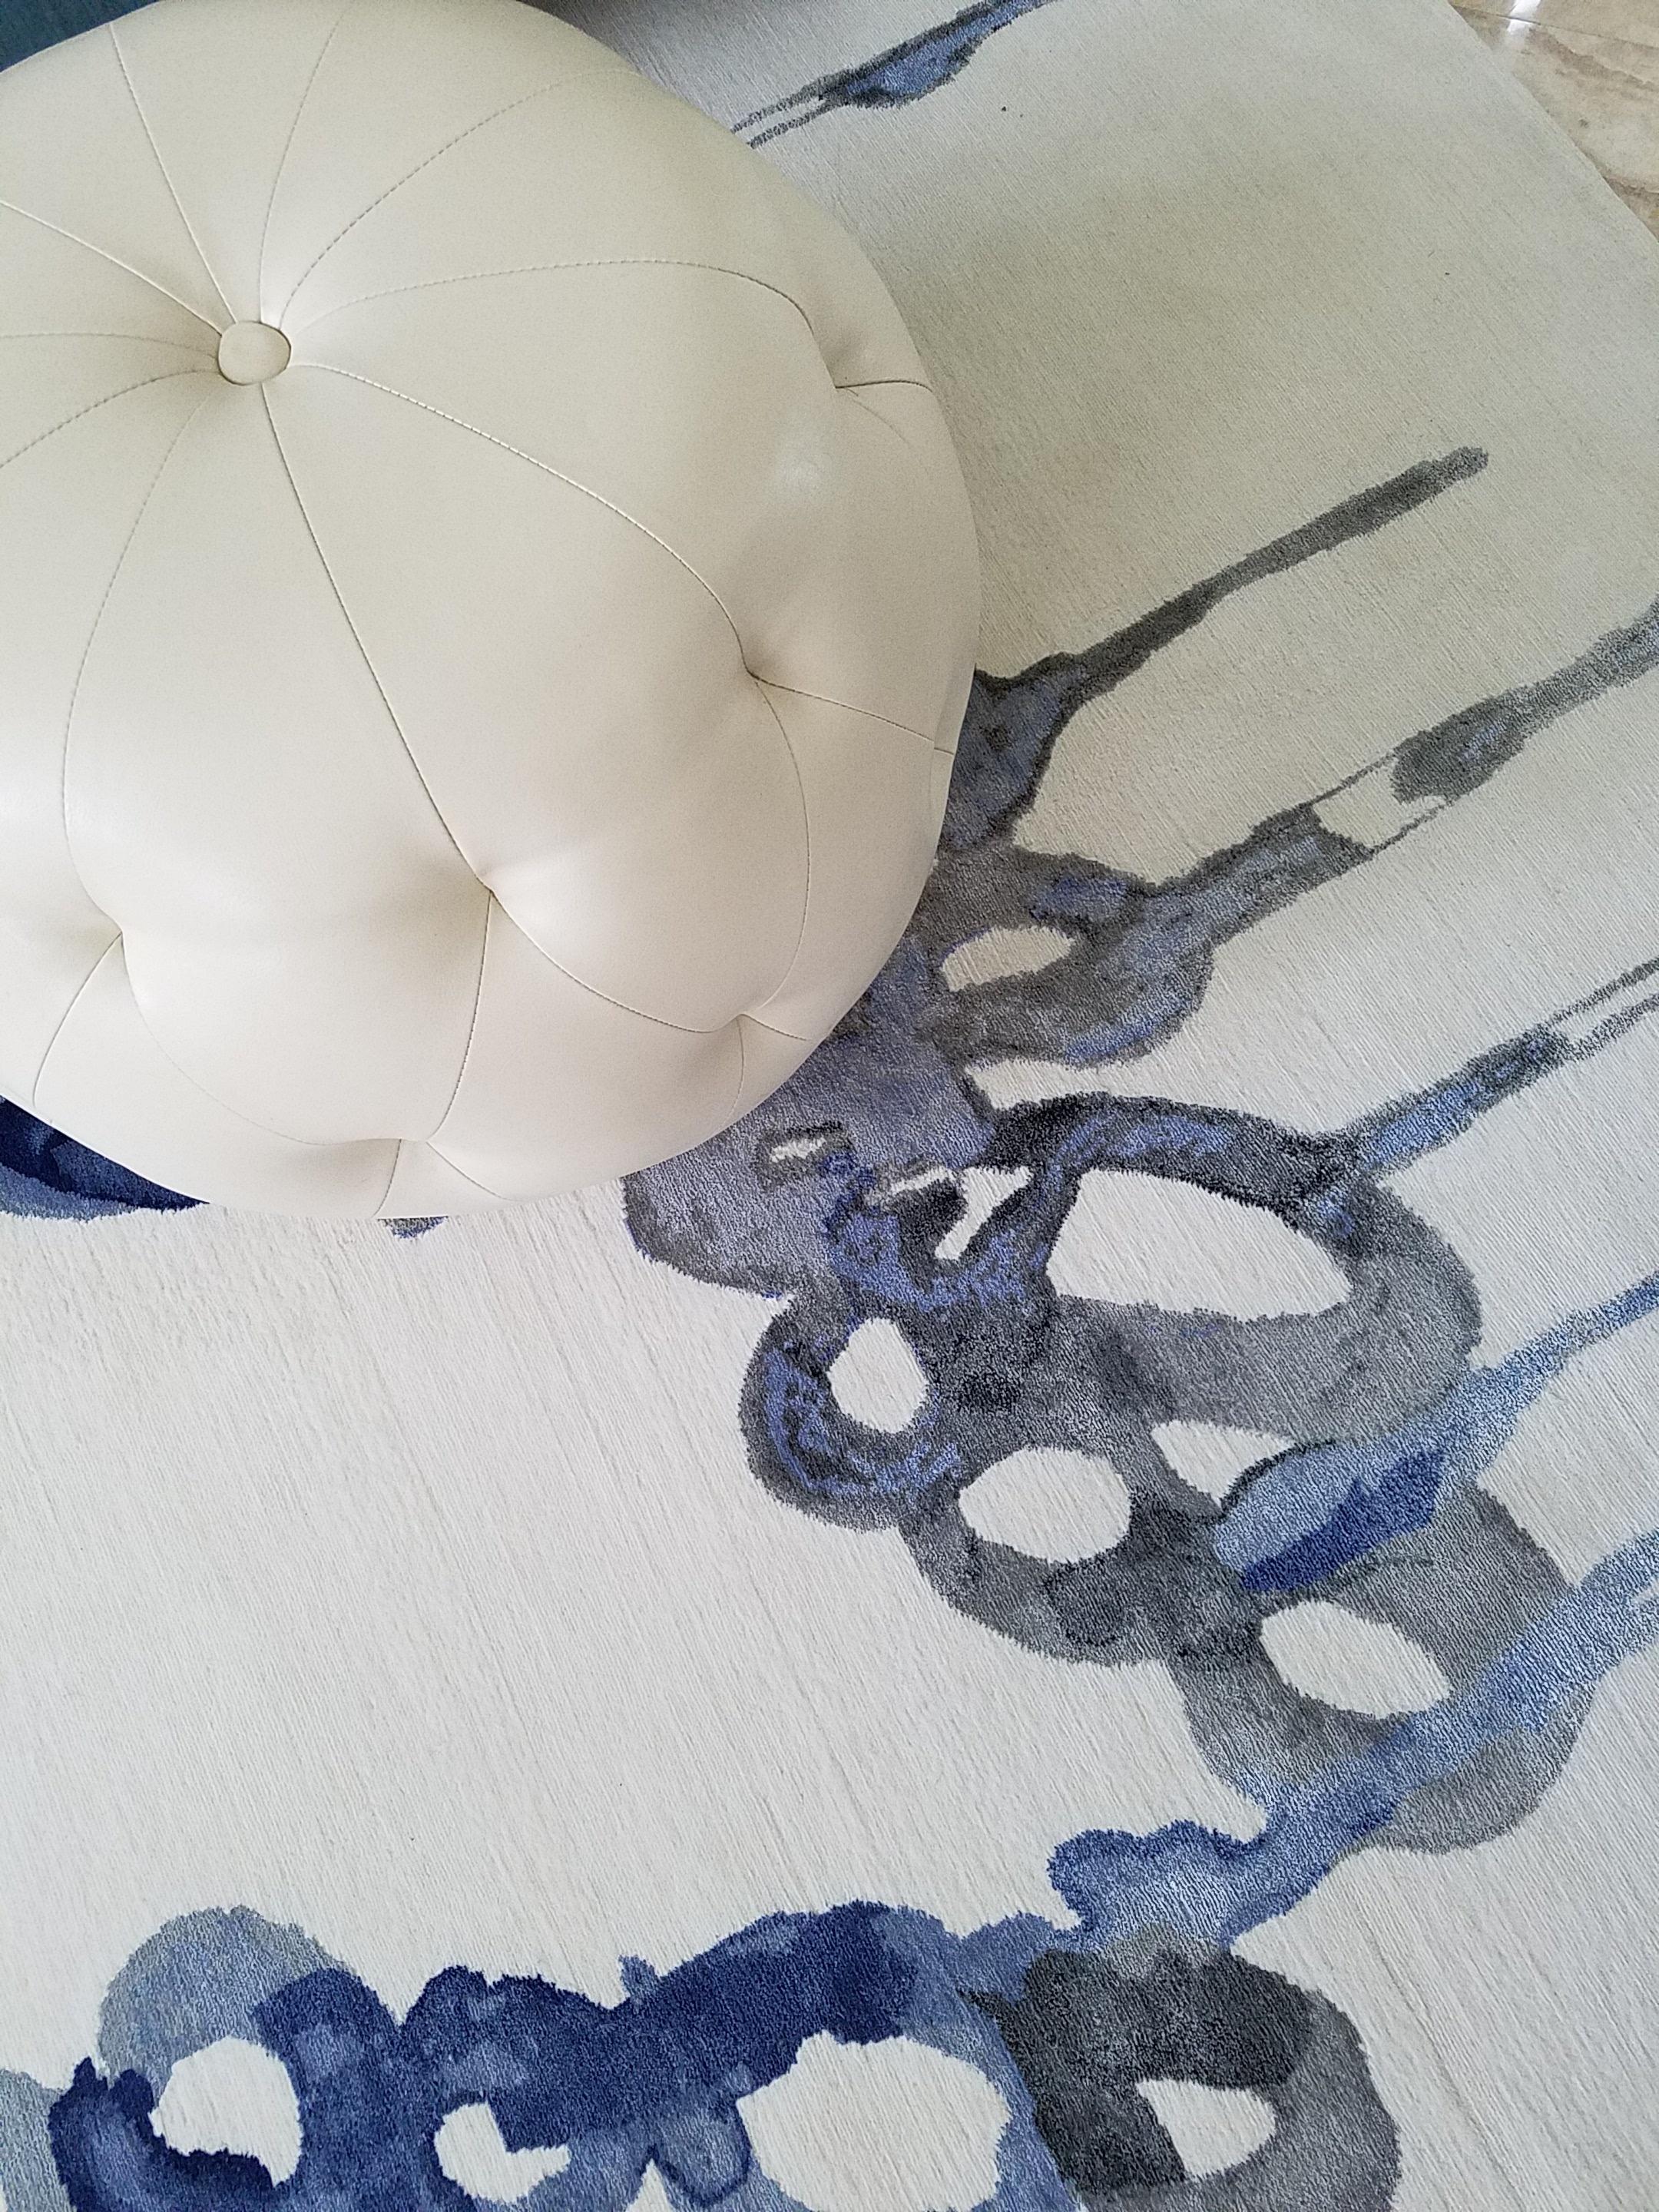 Playing with ambient blues and water lead the designer to an entirely new heights of artistic expression. A painting turned into a stunning piece resembling liquid art, blue mood rug evokes whimsy and wonder. Unmistakably alluring texture thanks to